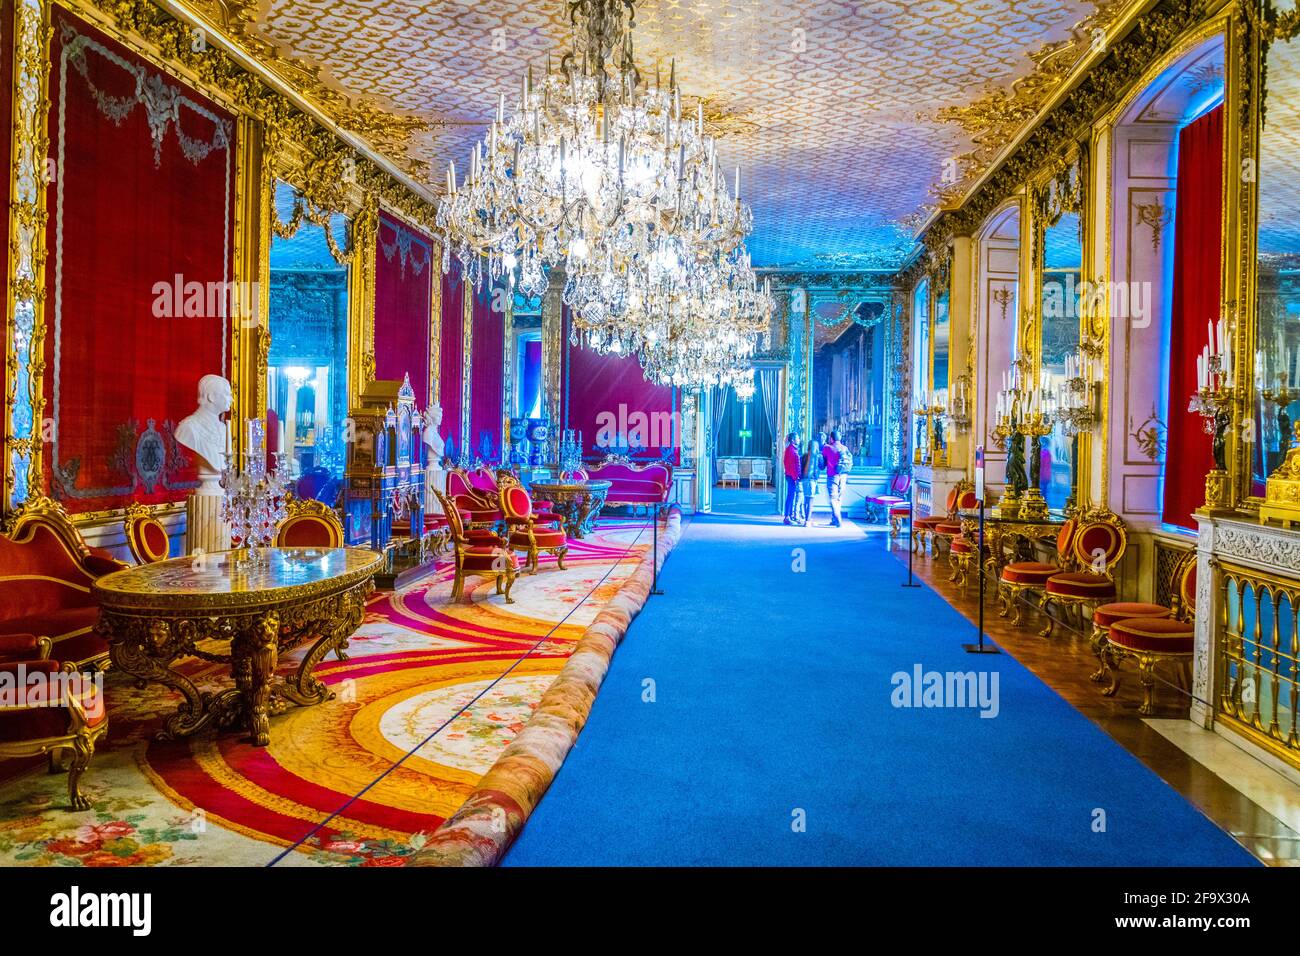 STOCKHOLM, SWEDEN, AUGUST 18, 2016: View of a chamber of the Kungliga slottet castle in Gamla Stan, Stockholm, Sweden Stock Photo